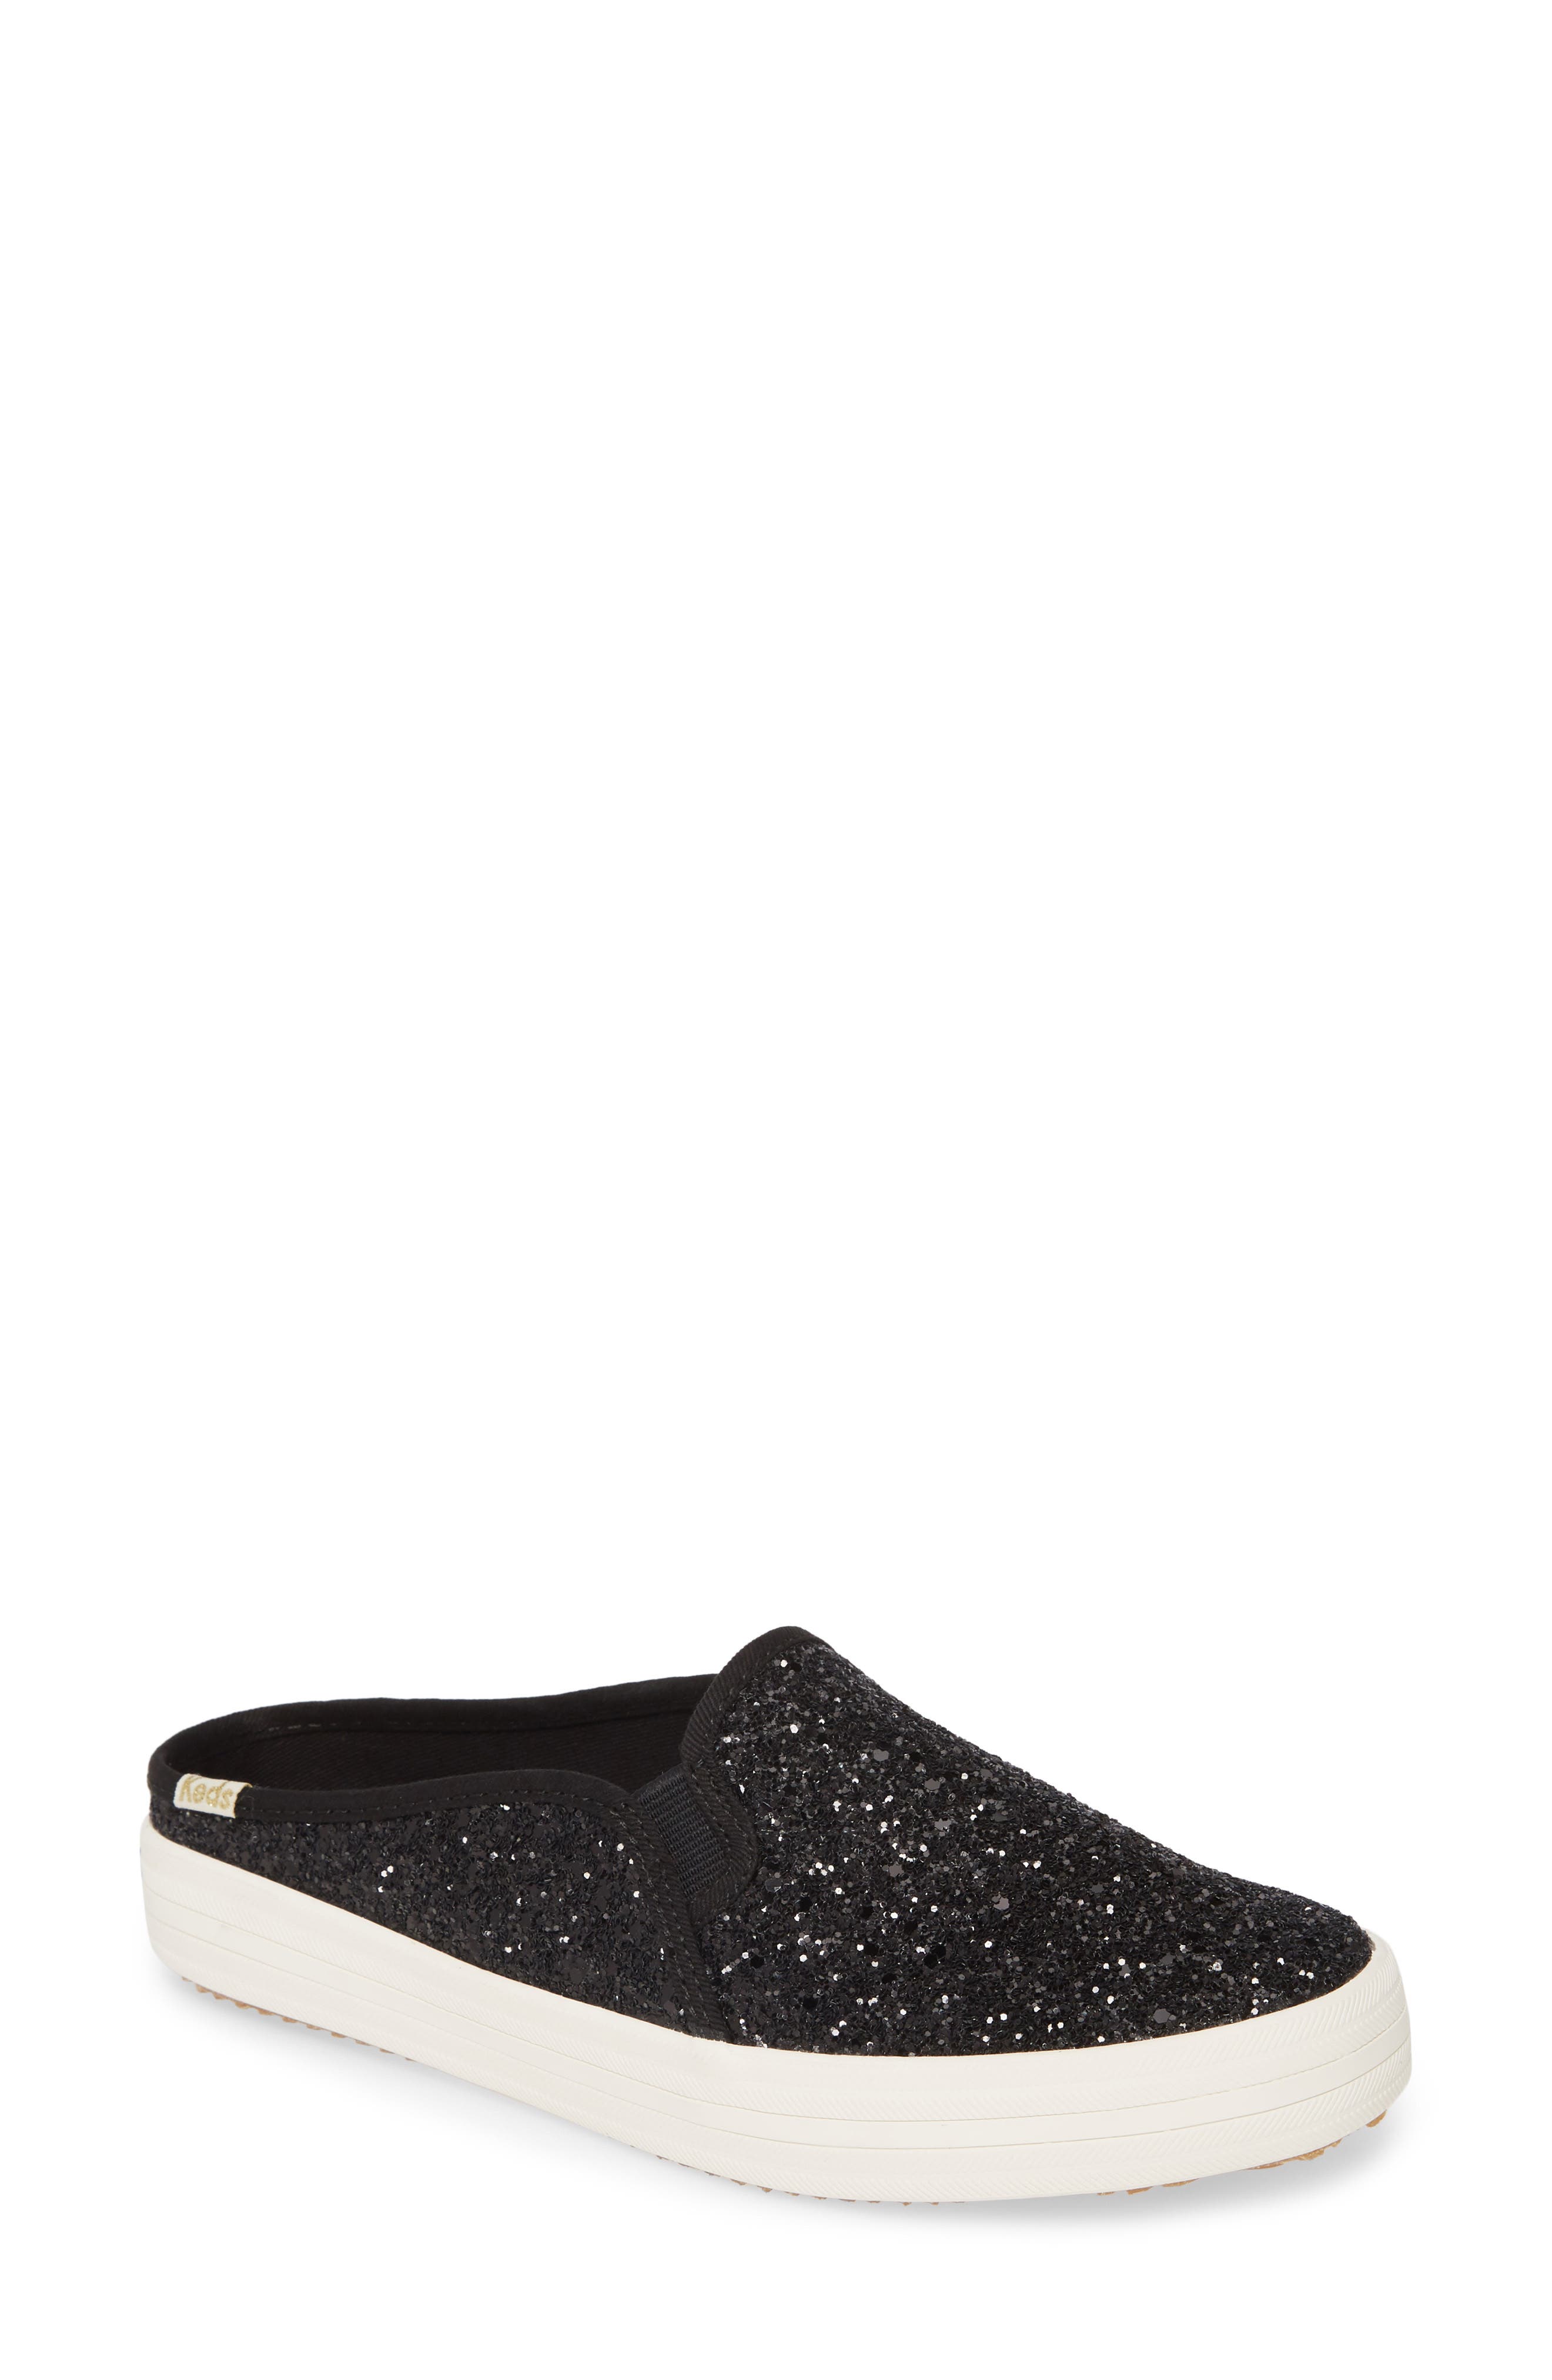 keds backless sneakers